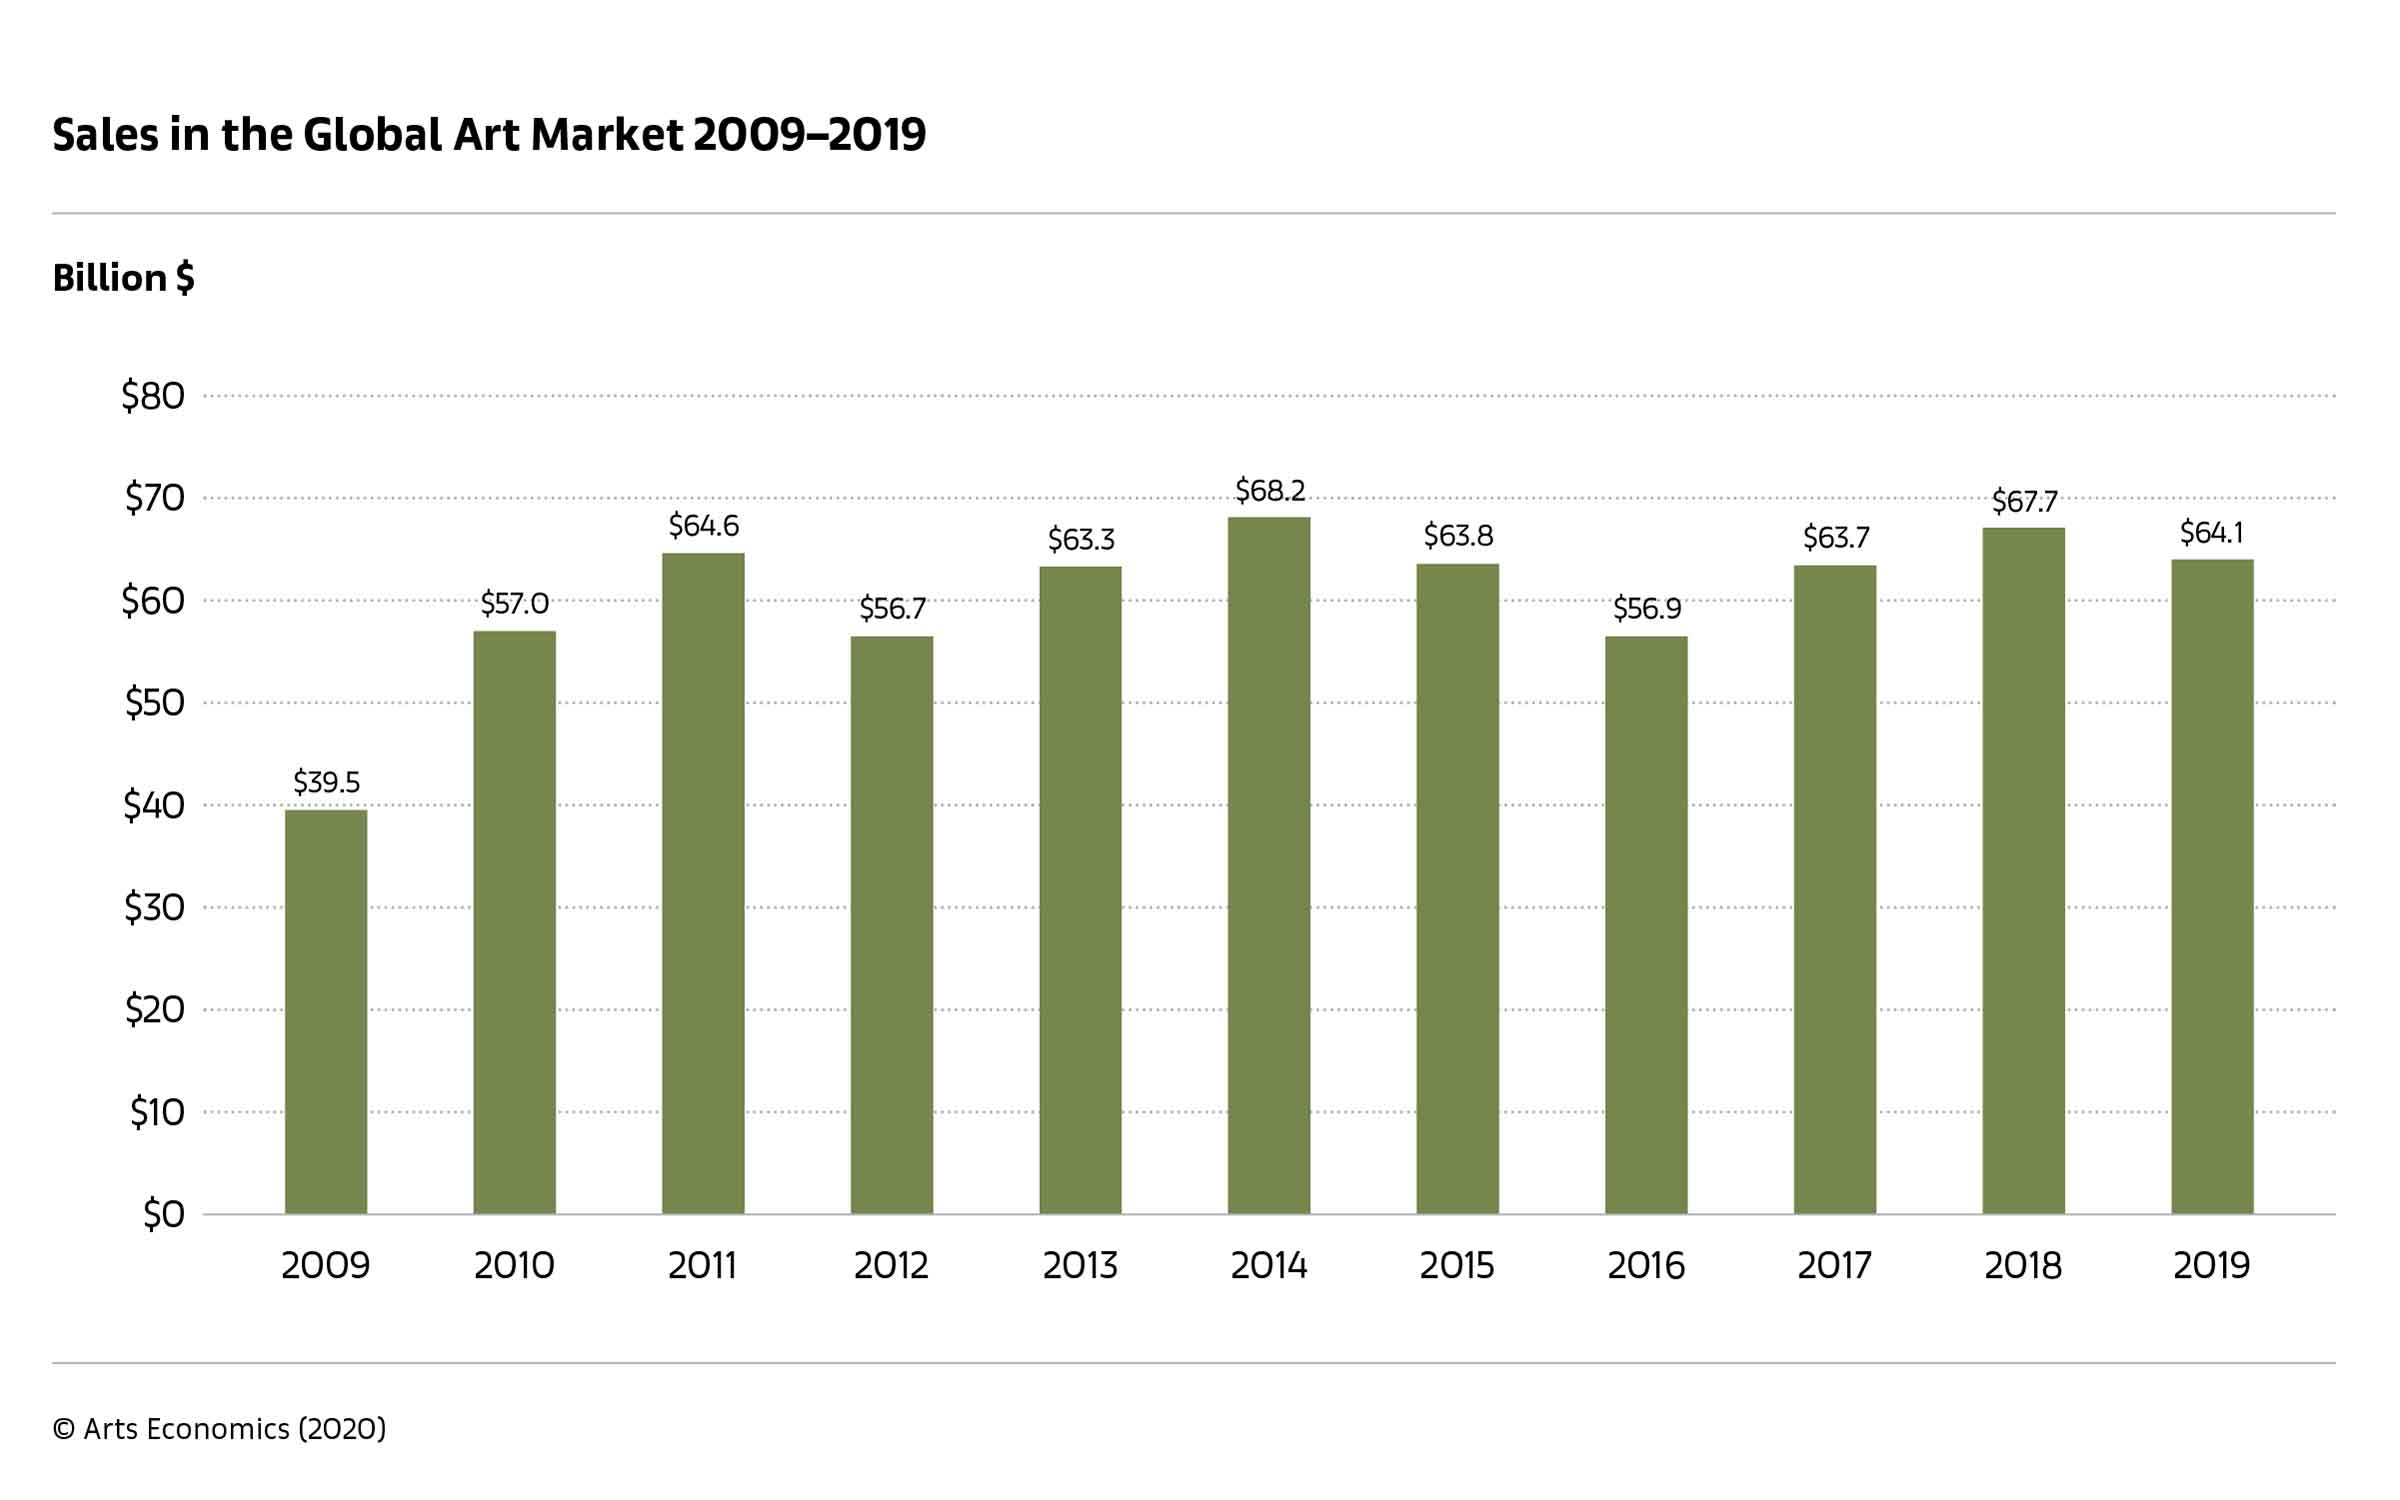 Galleries saw a steady art market in 2019, with sales climbing 2% from 2018, to $36.8 billion, accounting for just over half of the total market, estimated at $64.1 billion.